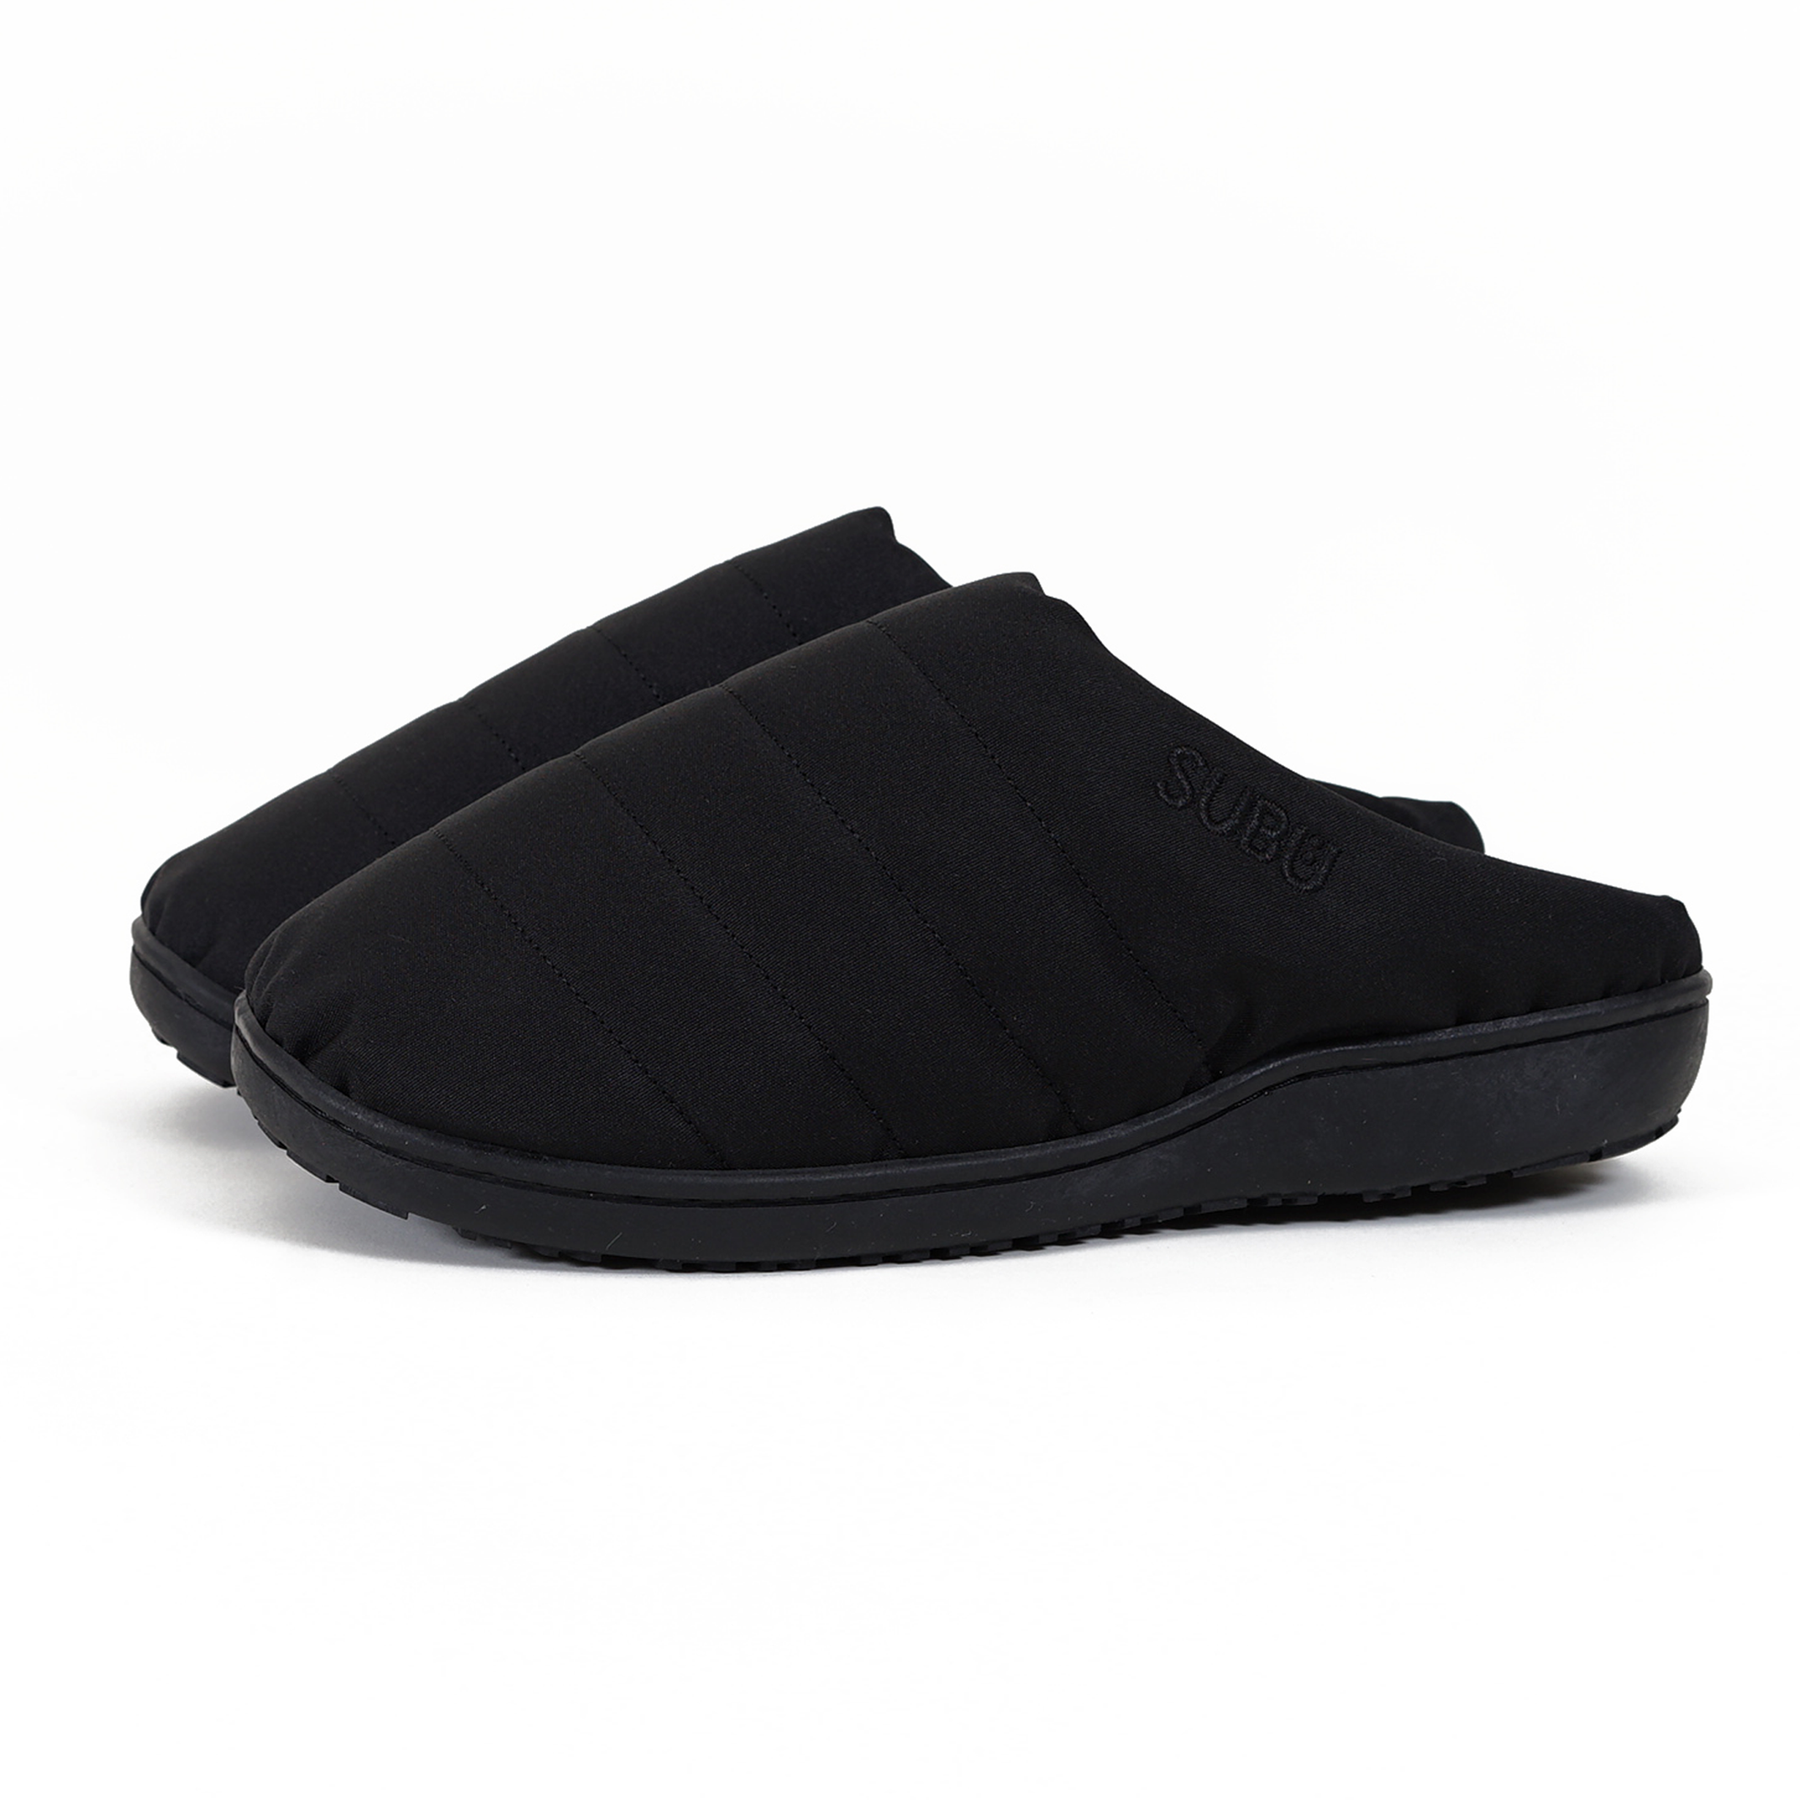 enkemand halvt initial AMEICO - Official US Distributor of SUBU - Nannen Outdoor Slippers - Black